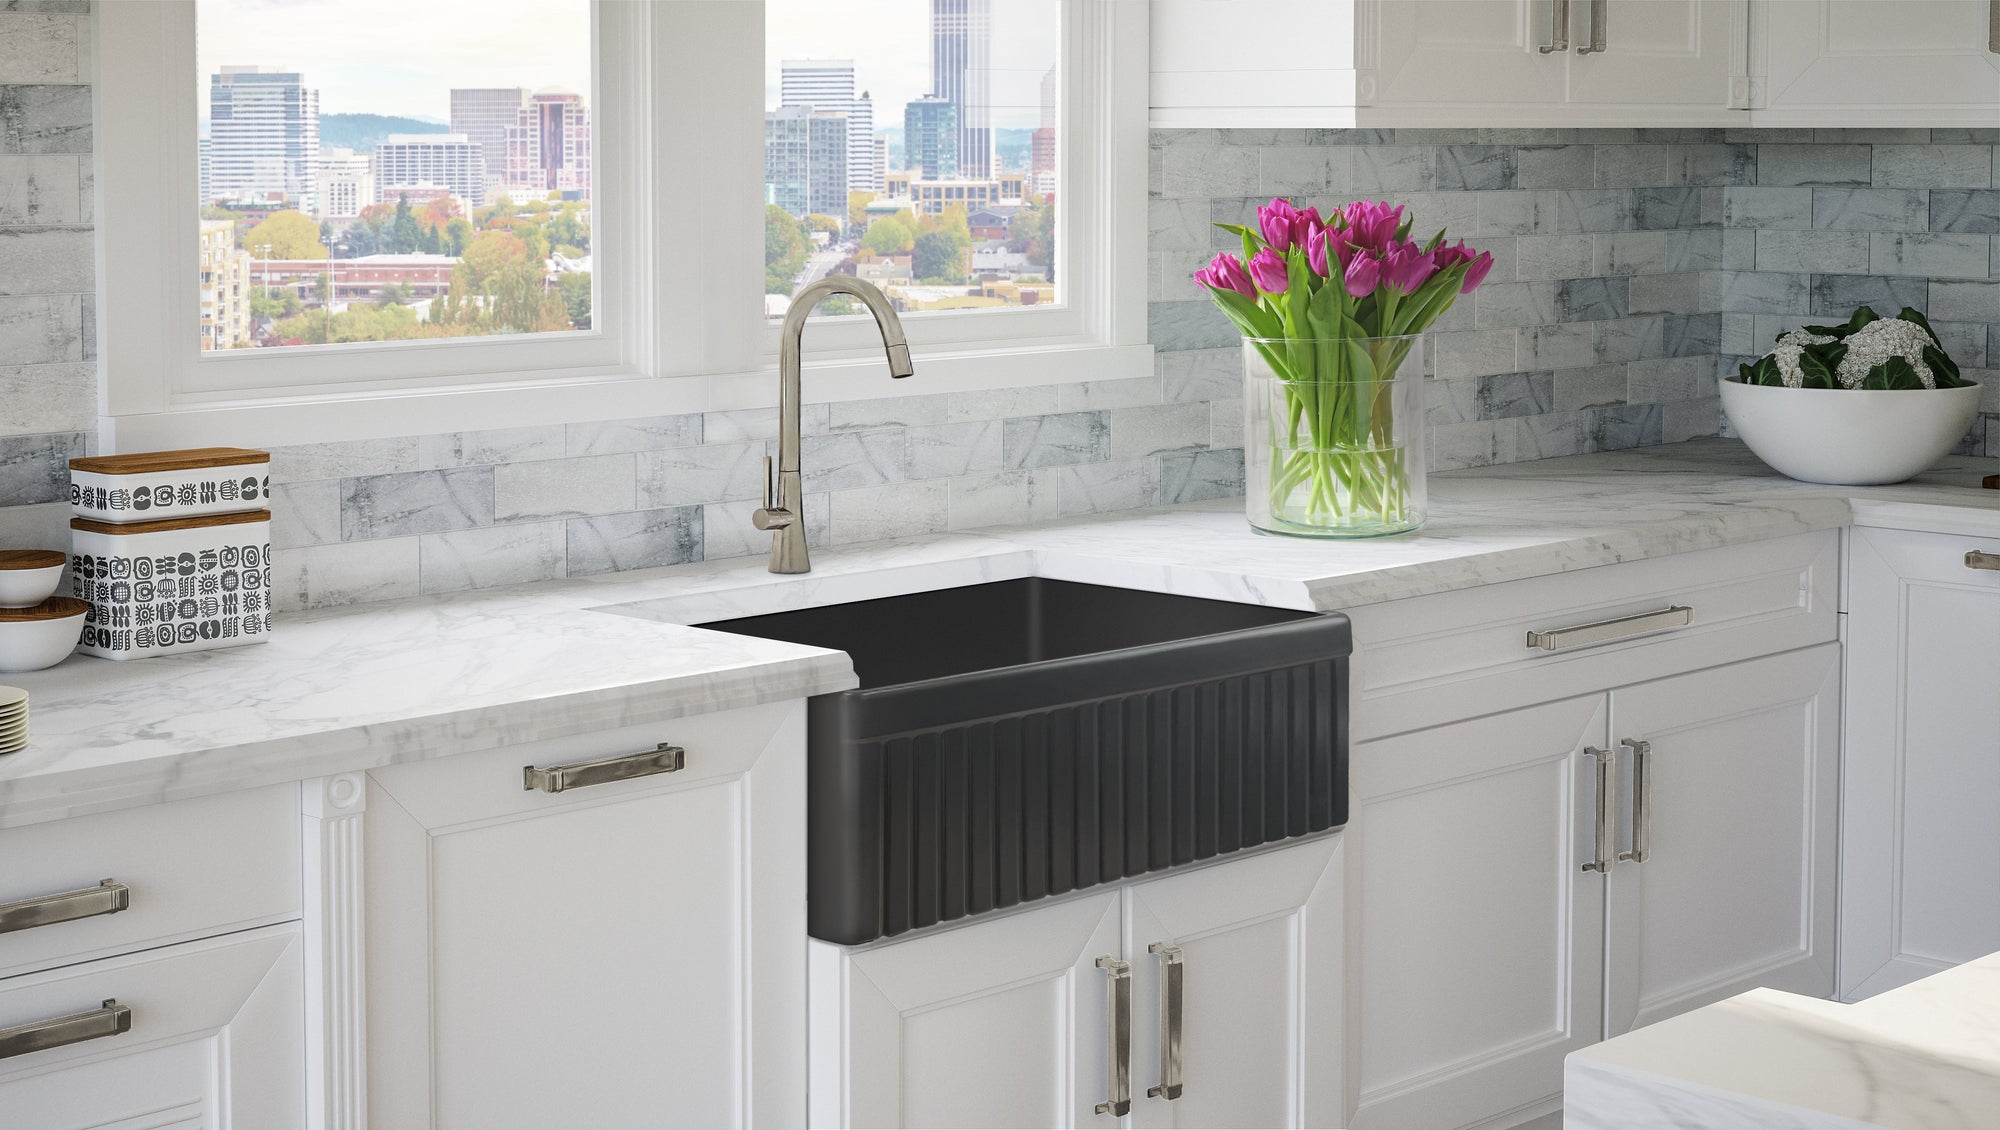 FSW1027PN LUXURY 33-INCH SOLID FIRECLAY FARMHOUSE SINK, MATTE BLACK, POL. NICKEL ACCS, FLUTED FRONT